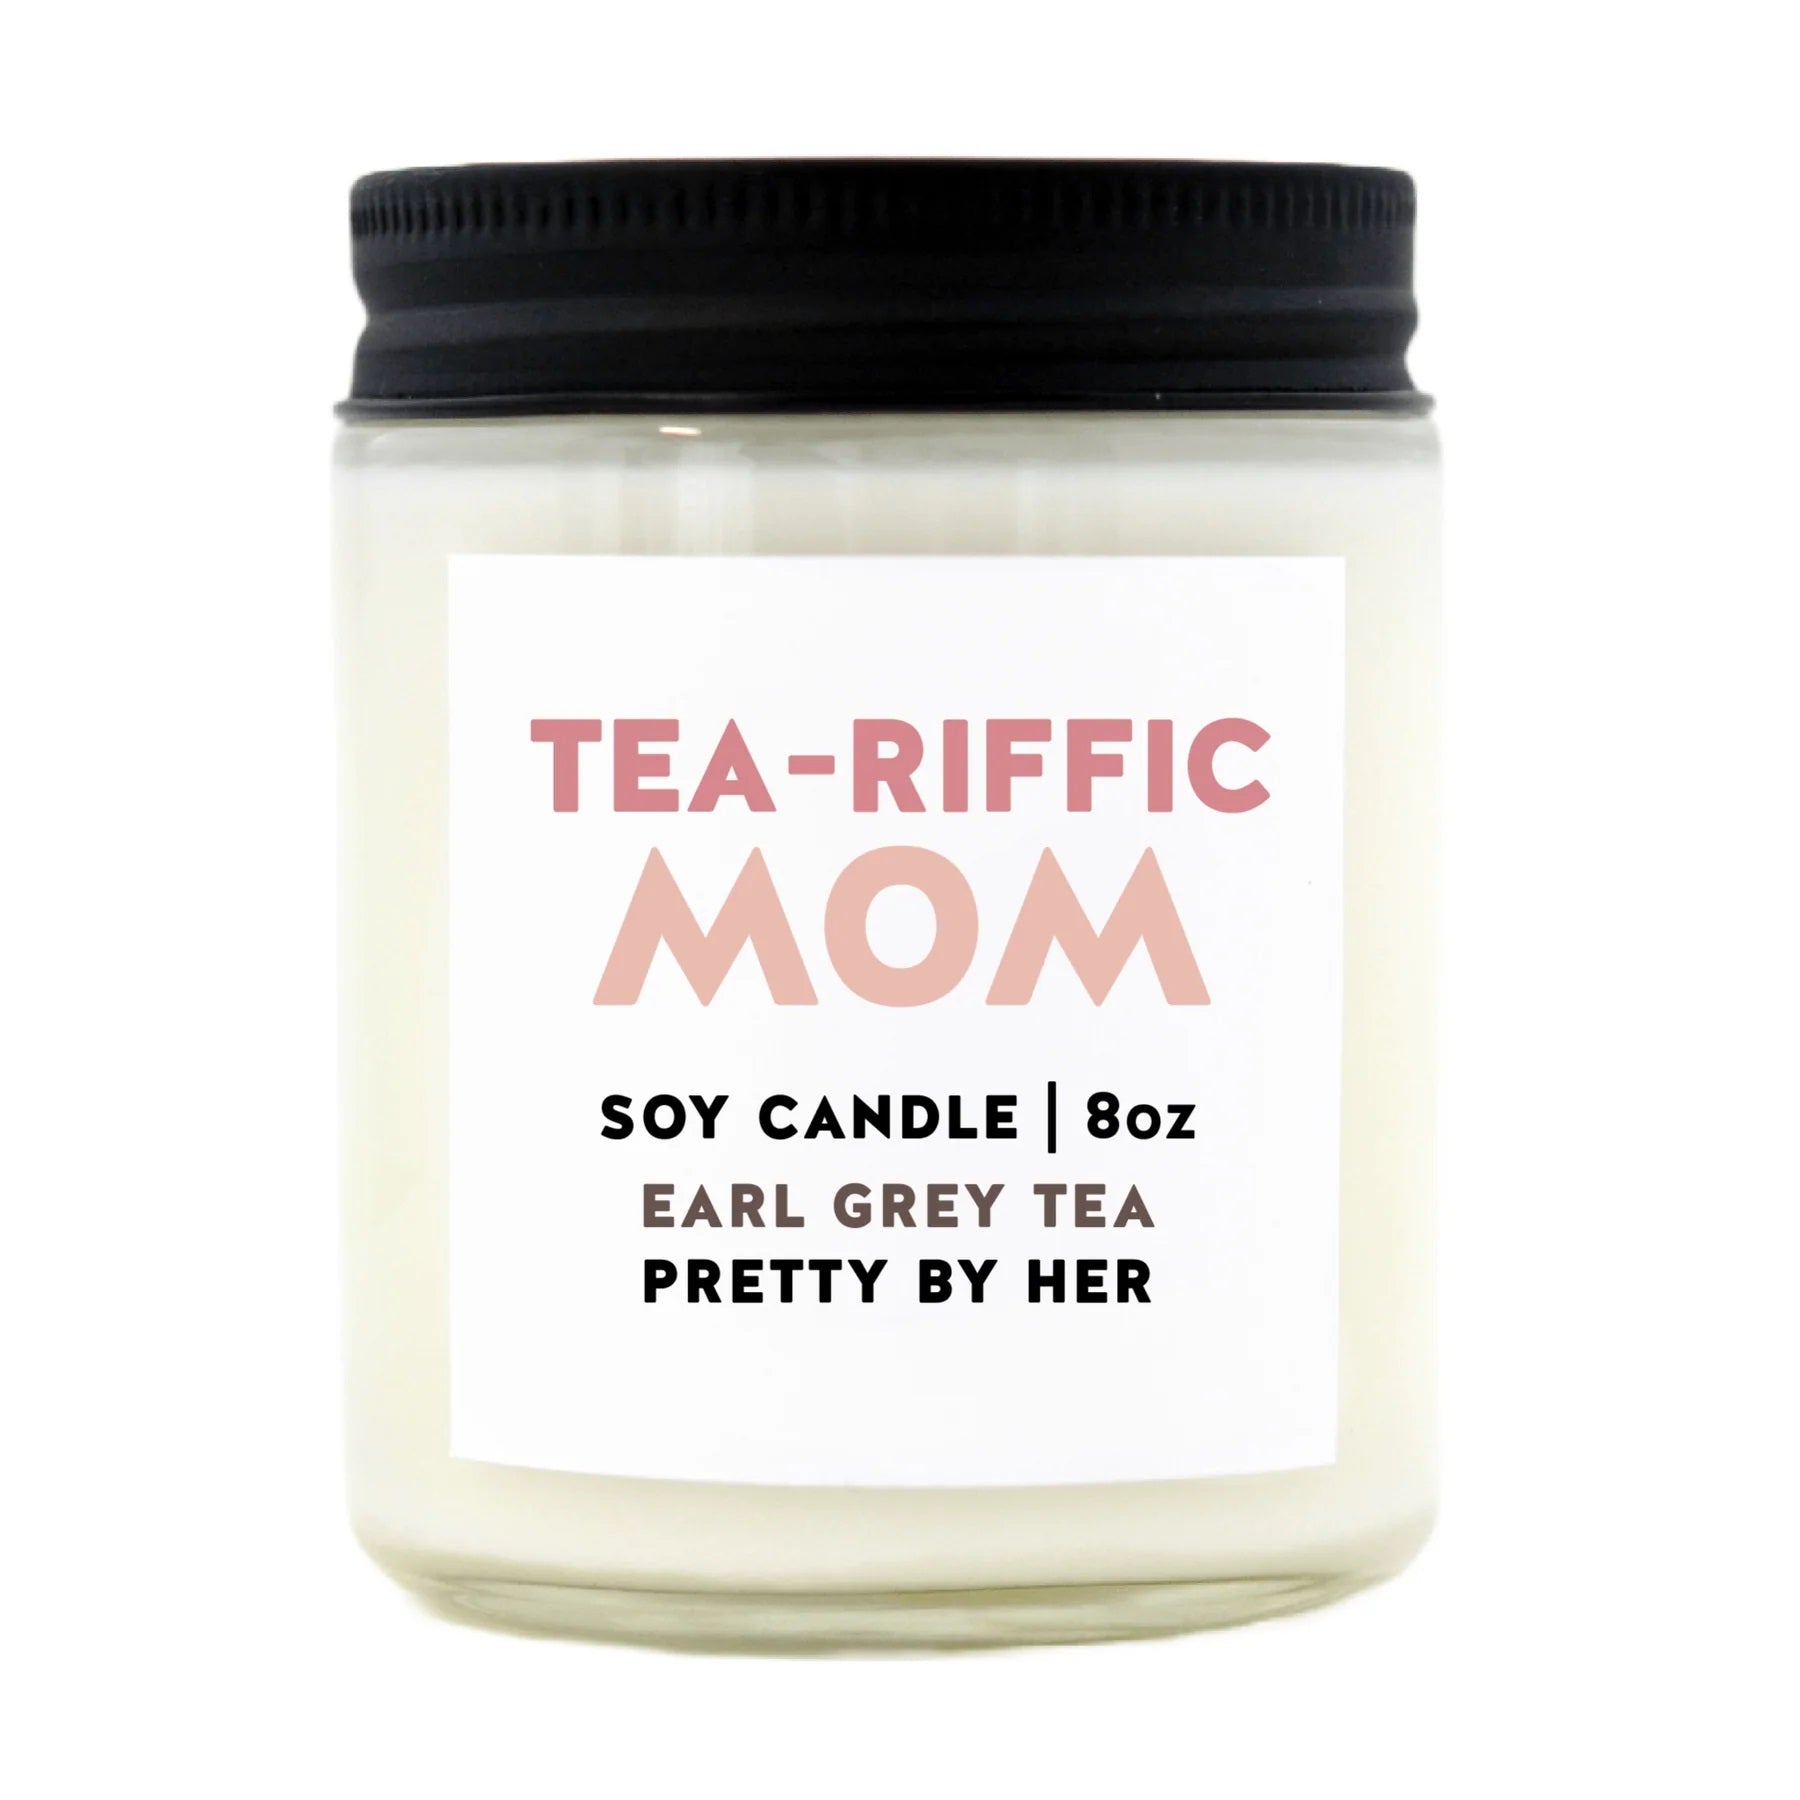 Pretty By Her - Tea-riffic Mom Soy Wax Candle